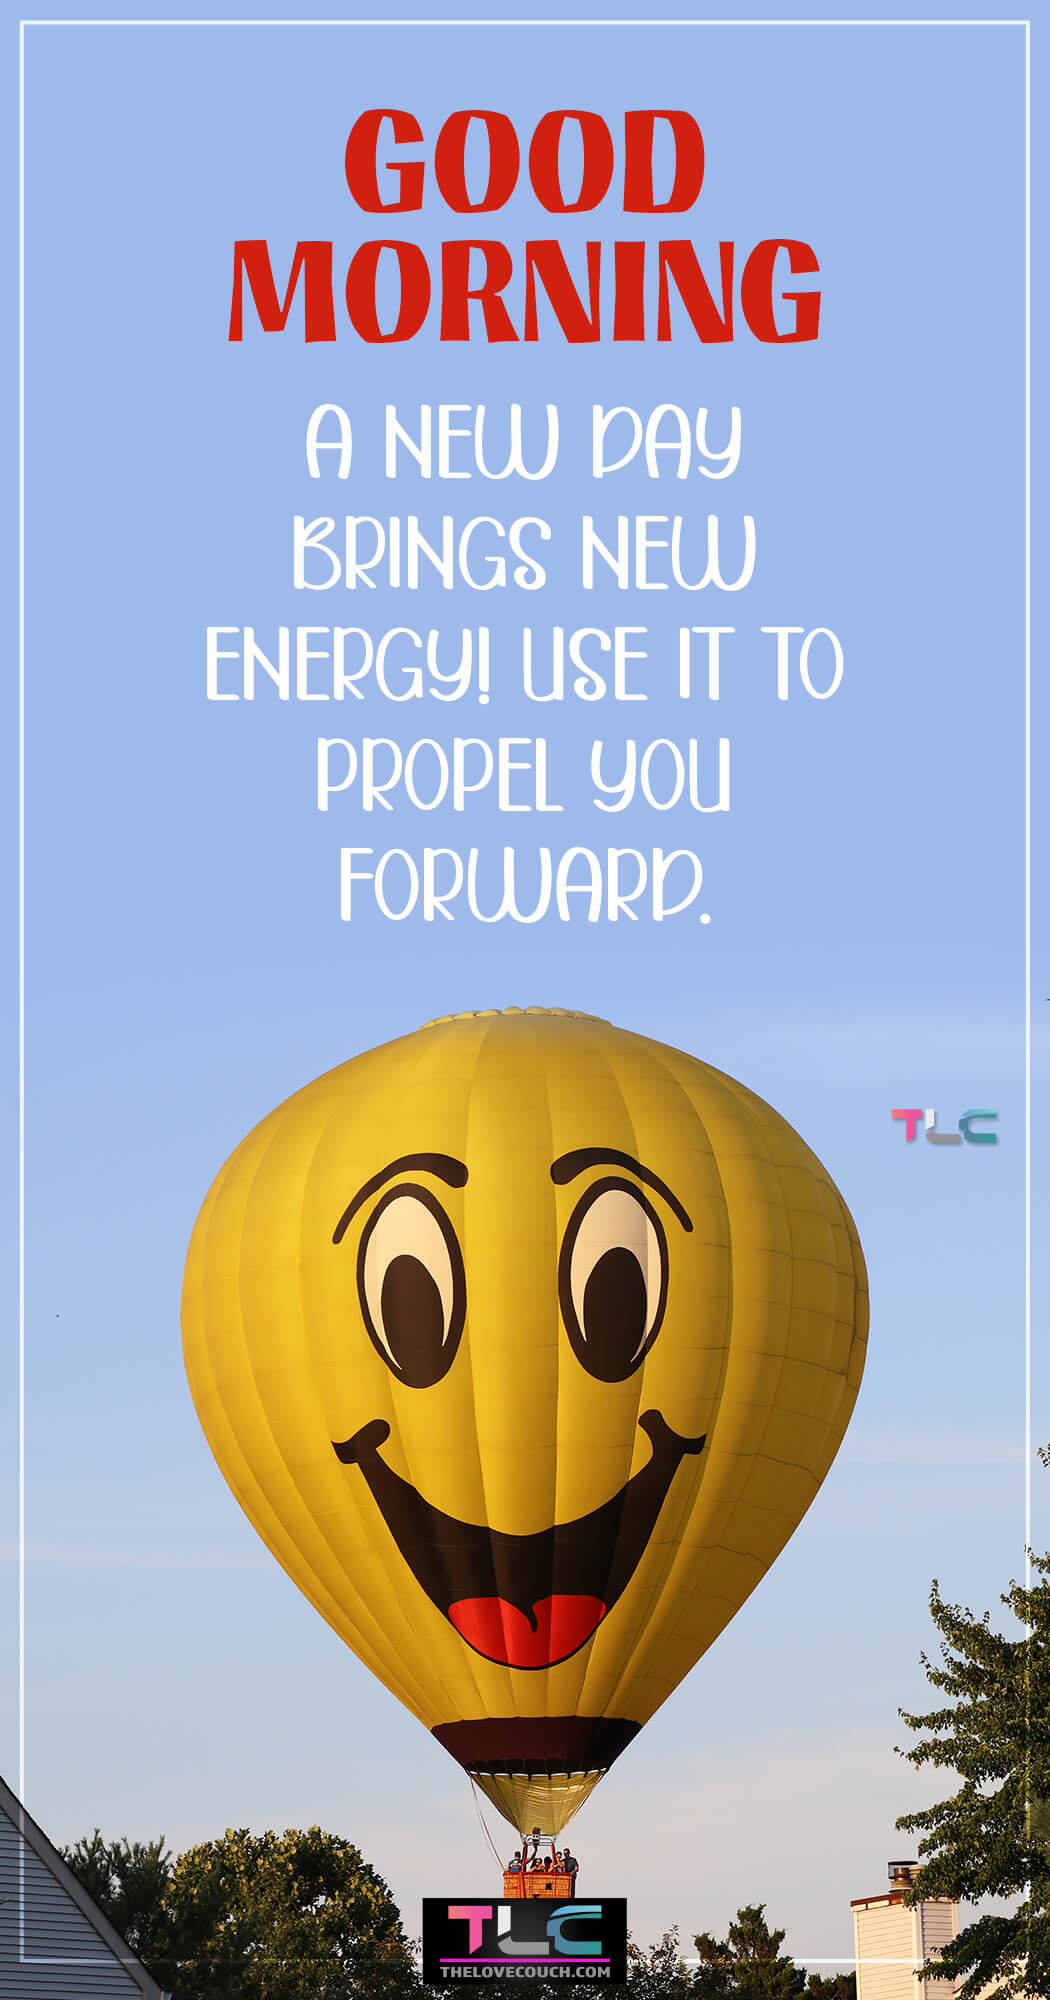 A new day brings new energy! Use it to propel you forward. - Good Morning Images with Quotes